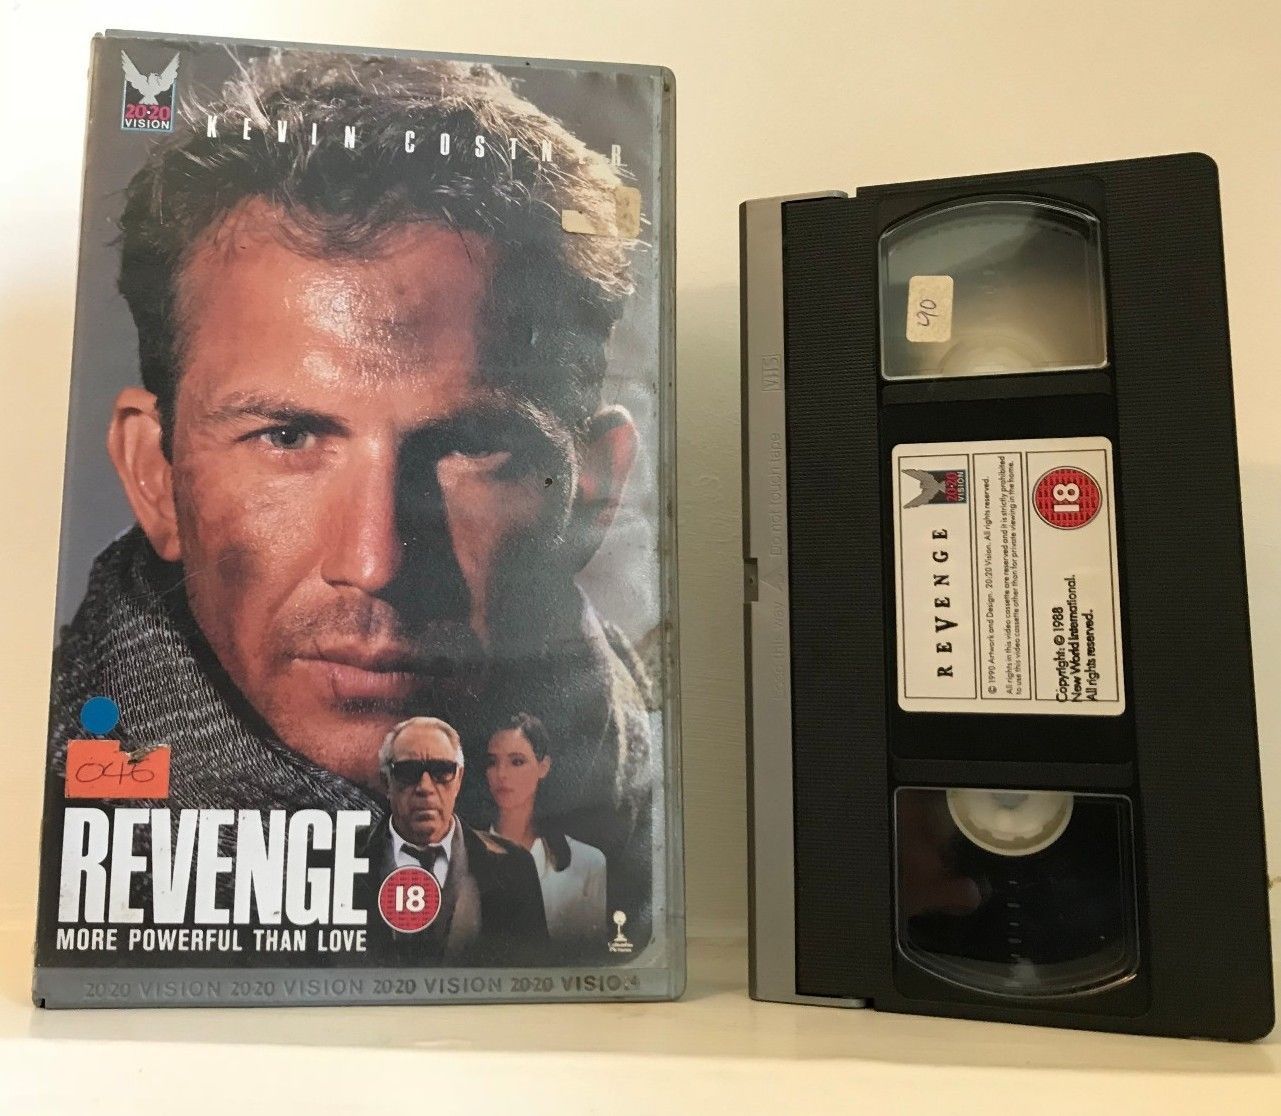 21 VHS Tapes We Used To Own (That Are Worth A Fortune Today)